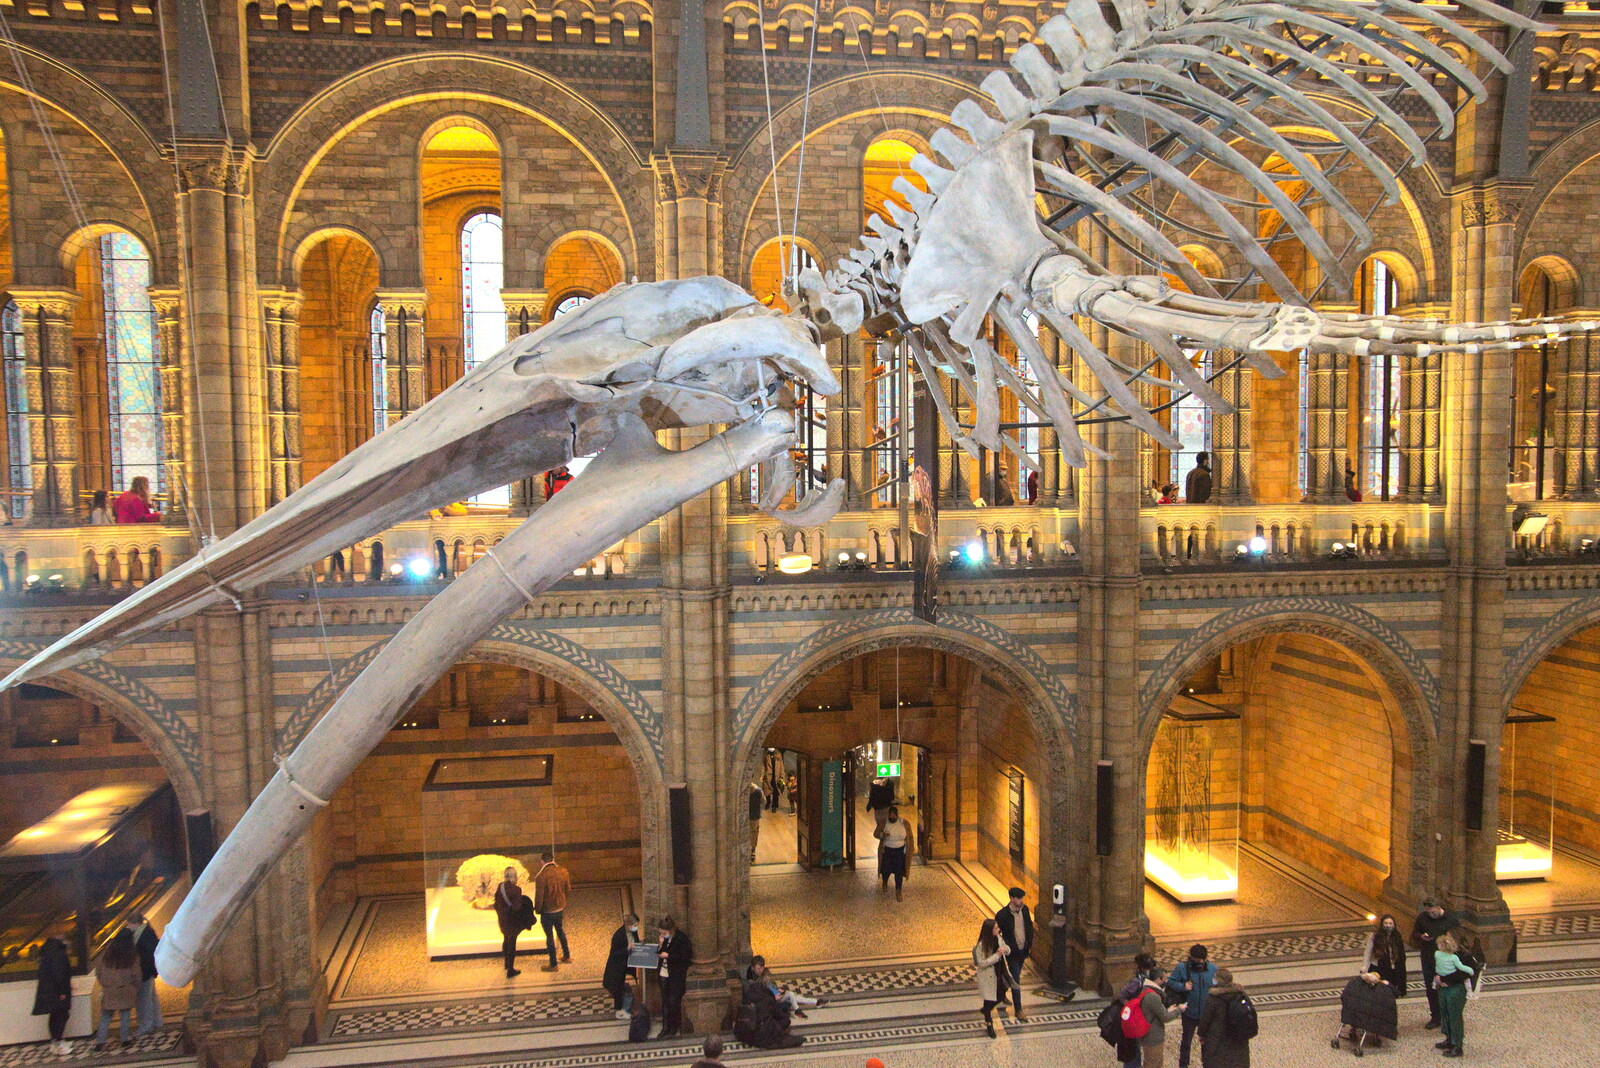 The head of the blue whale from A Trip to the Natural History Museum, Kensington, London - 15th January 2022